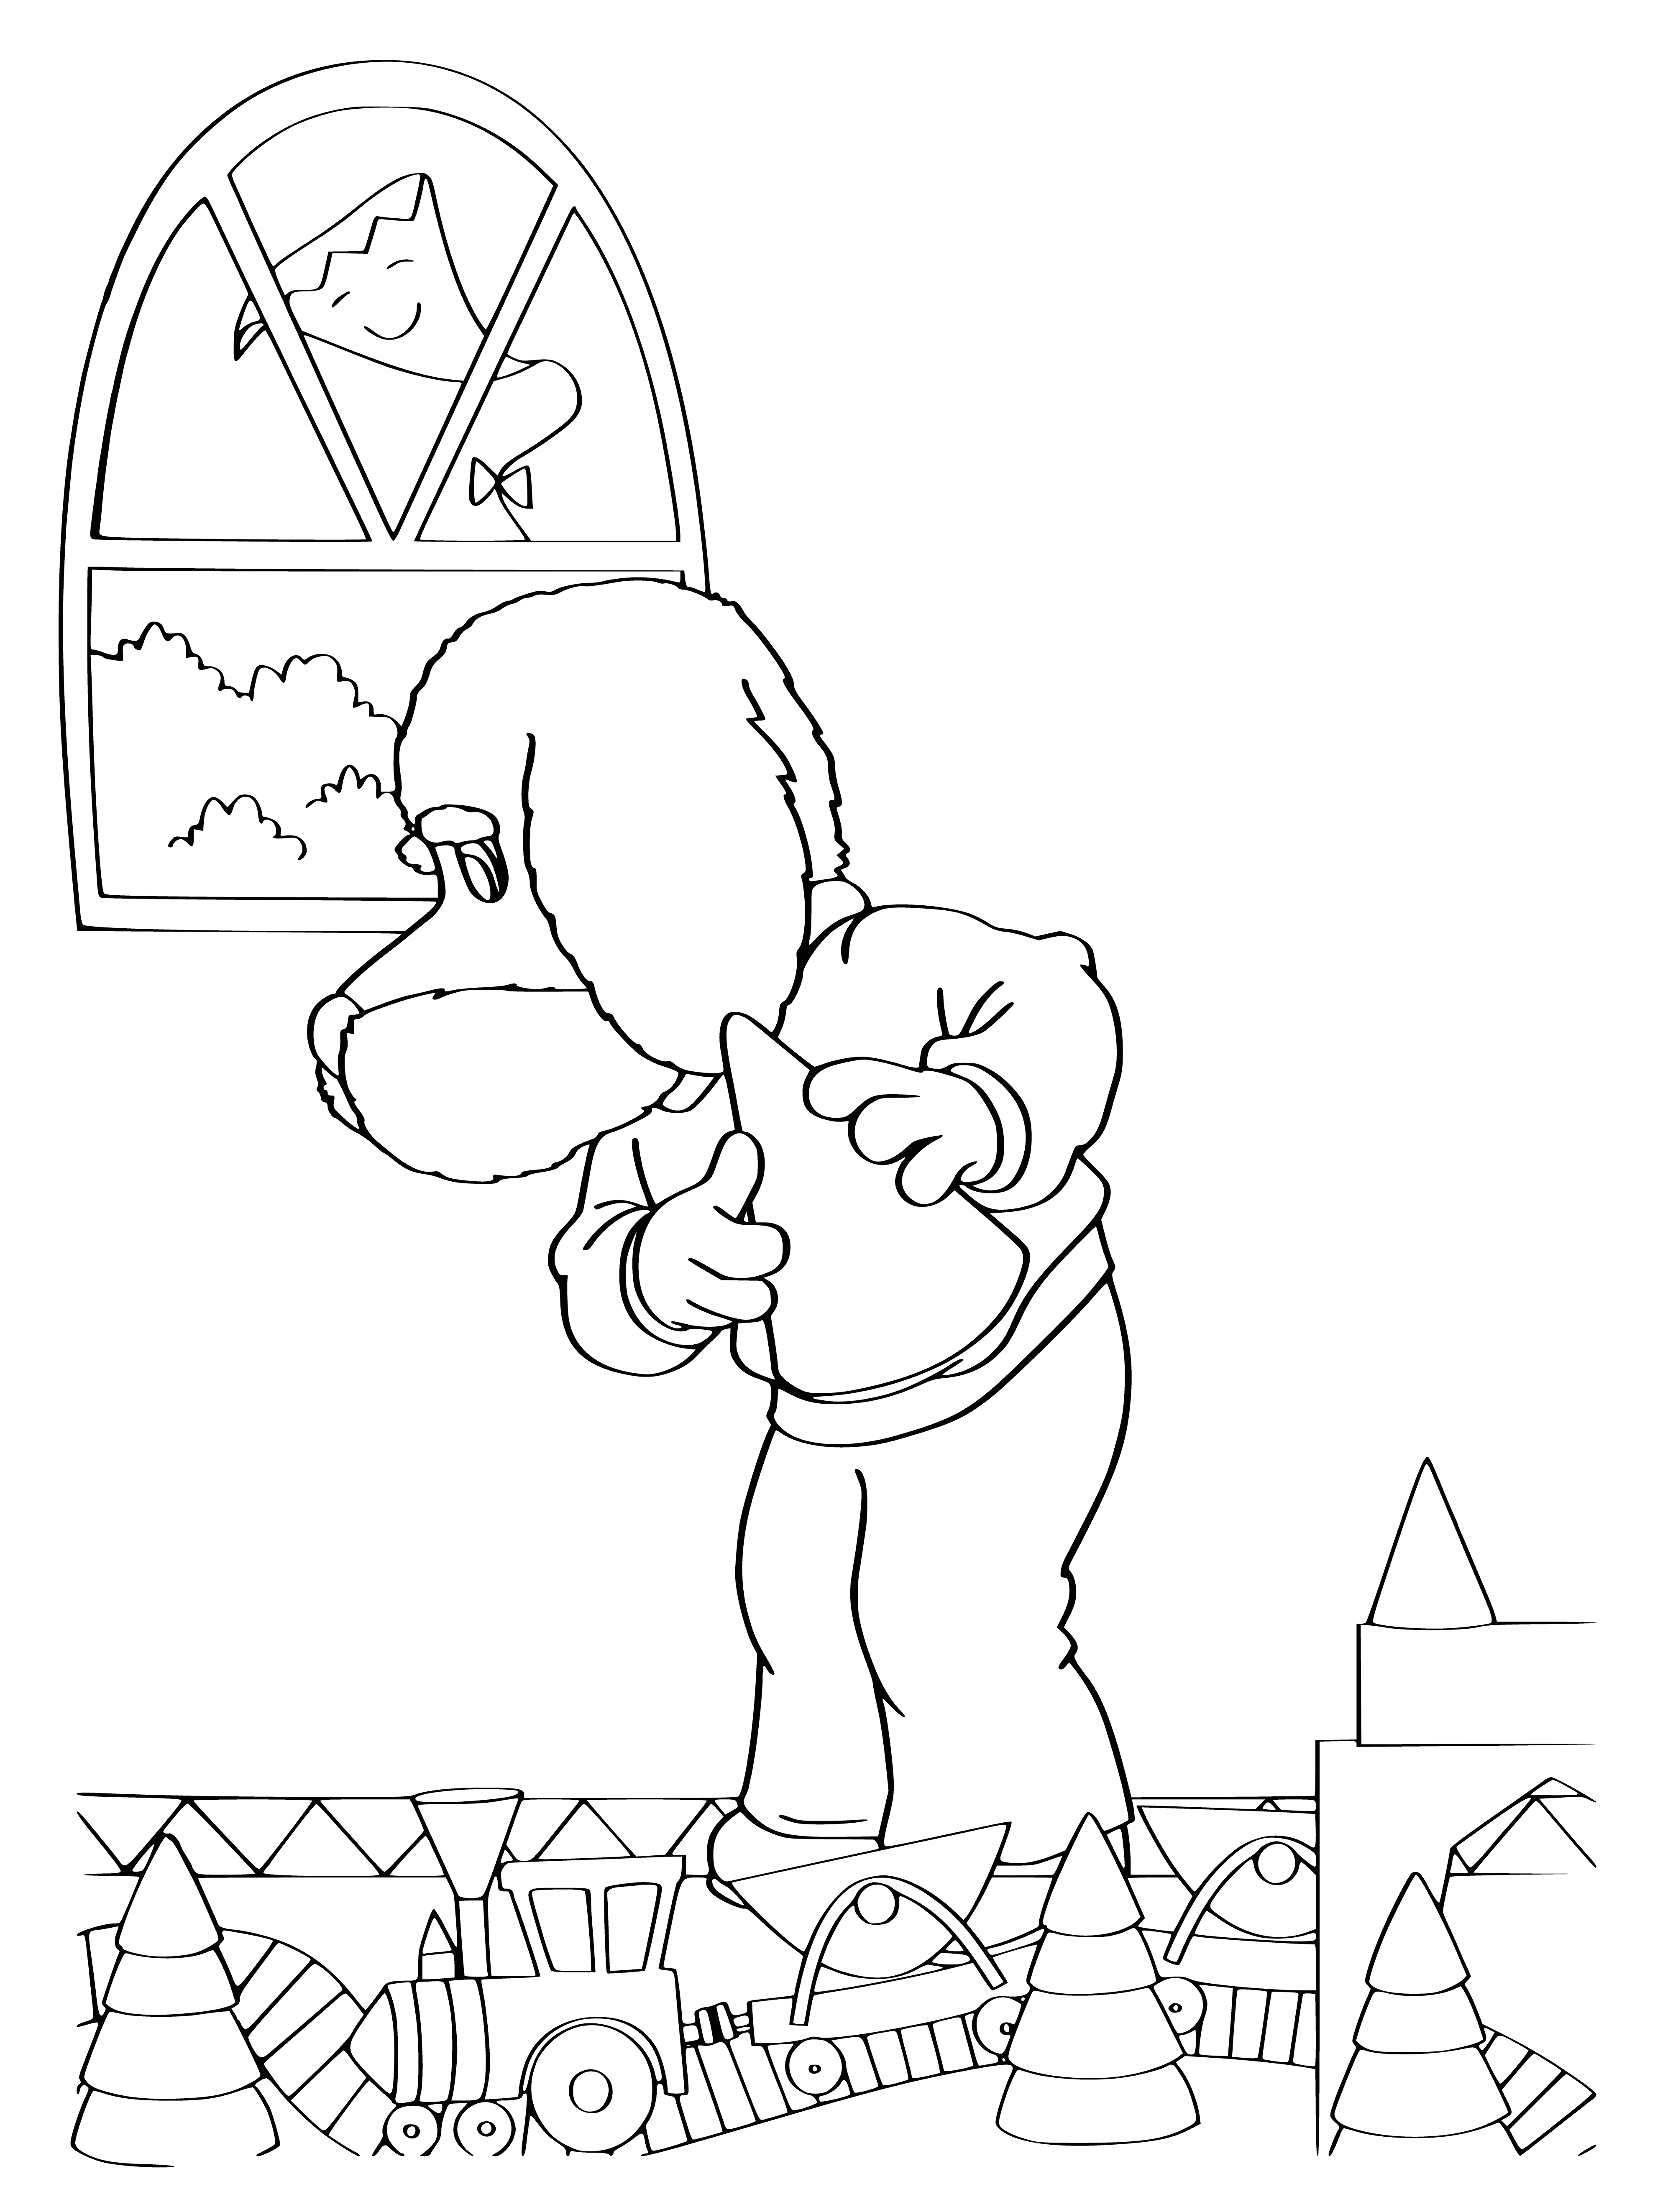 coloring page: Filya stands with arms outstretched, smiling, as the happy children sit around her.